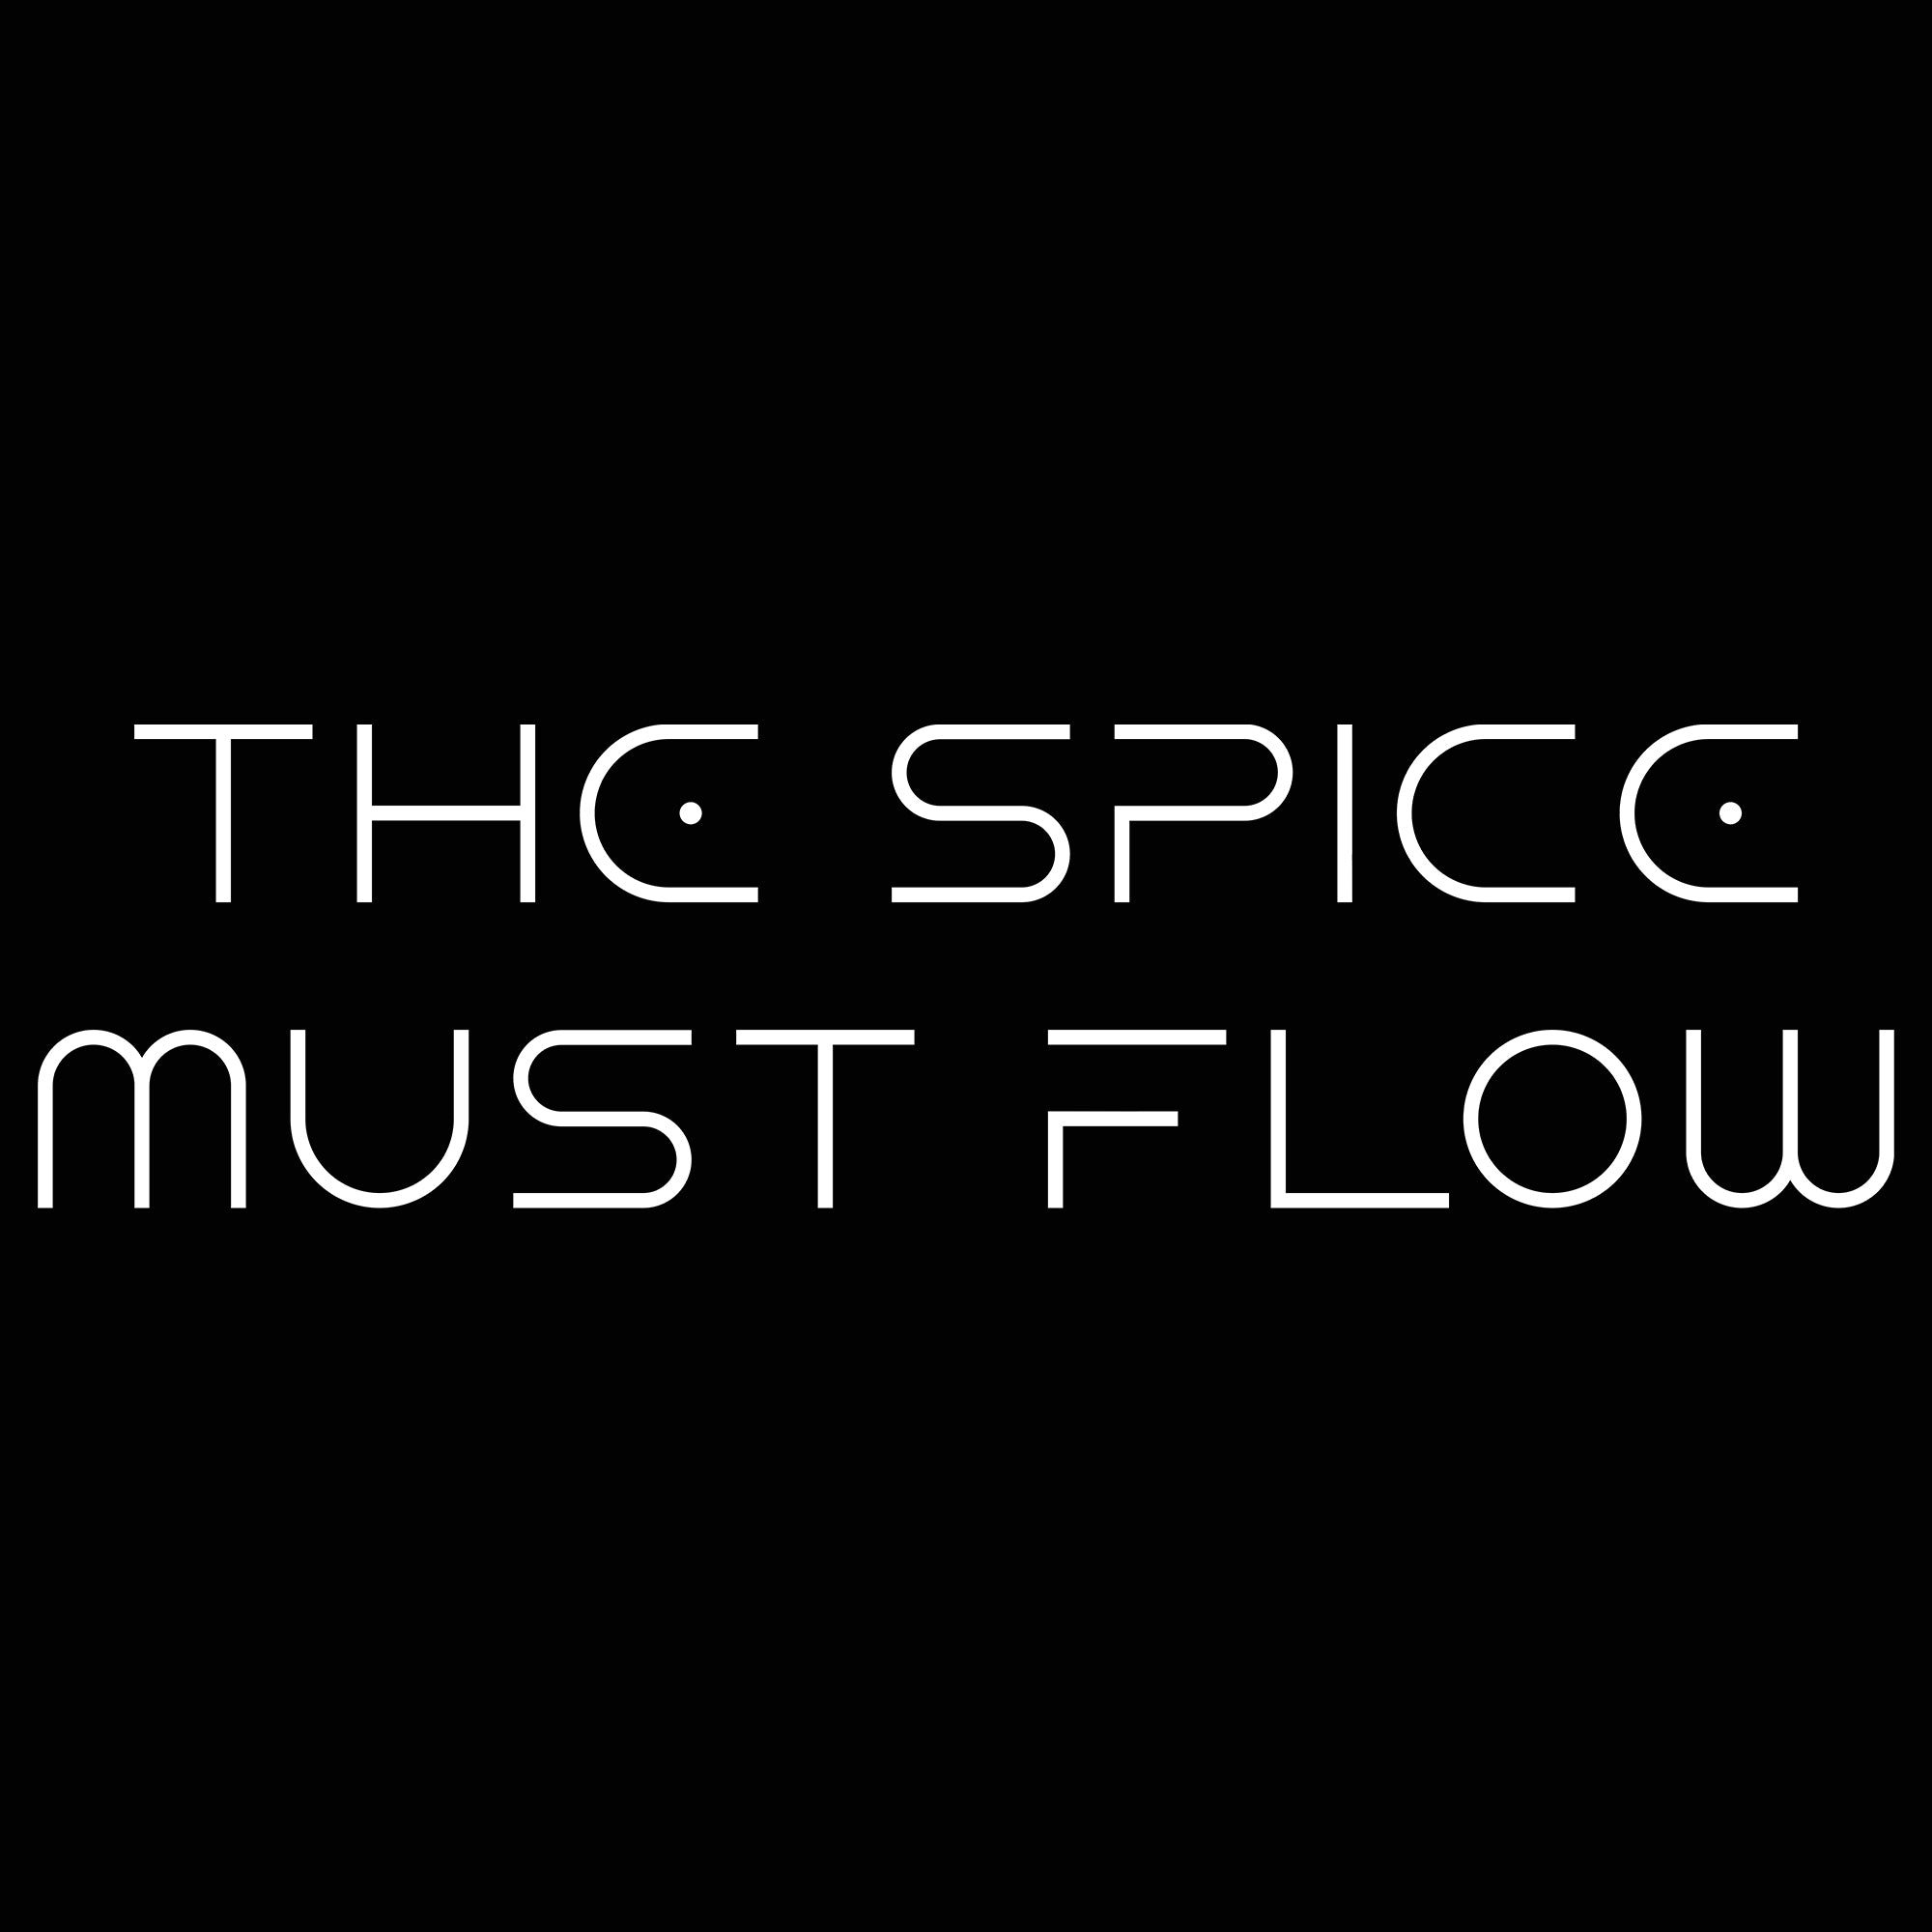 The Spice Must Flow